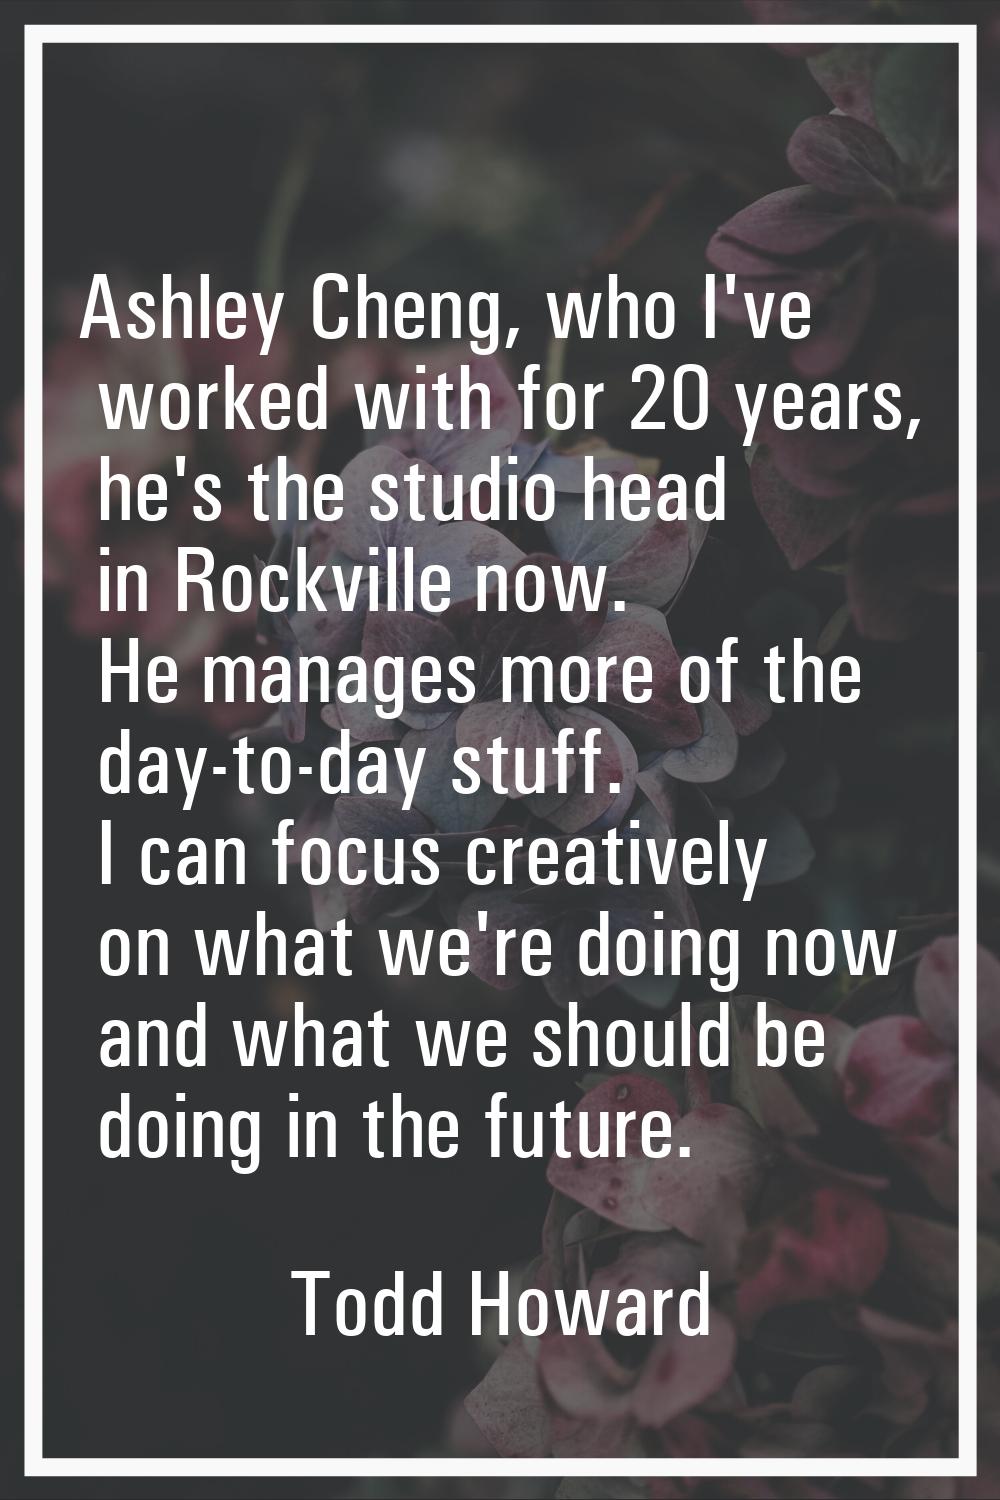 Ashley Cheng, who I've worked with for 20 years, he's the studio head in Rockville now. He manages 